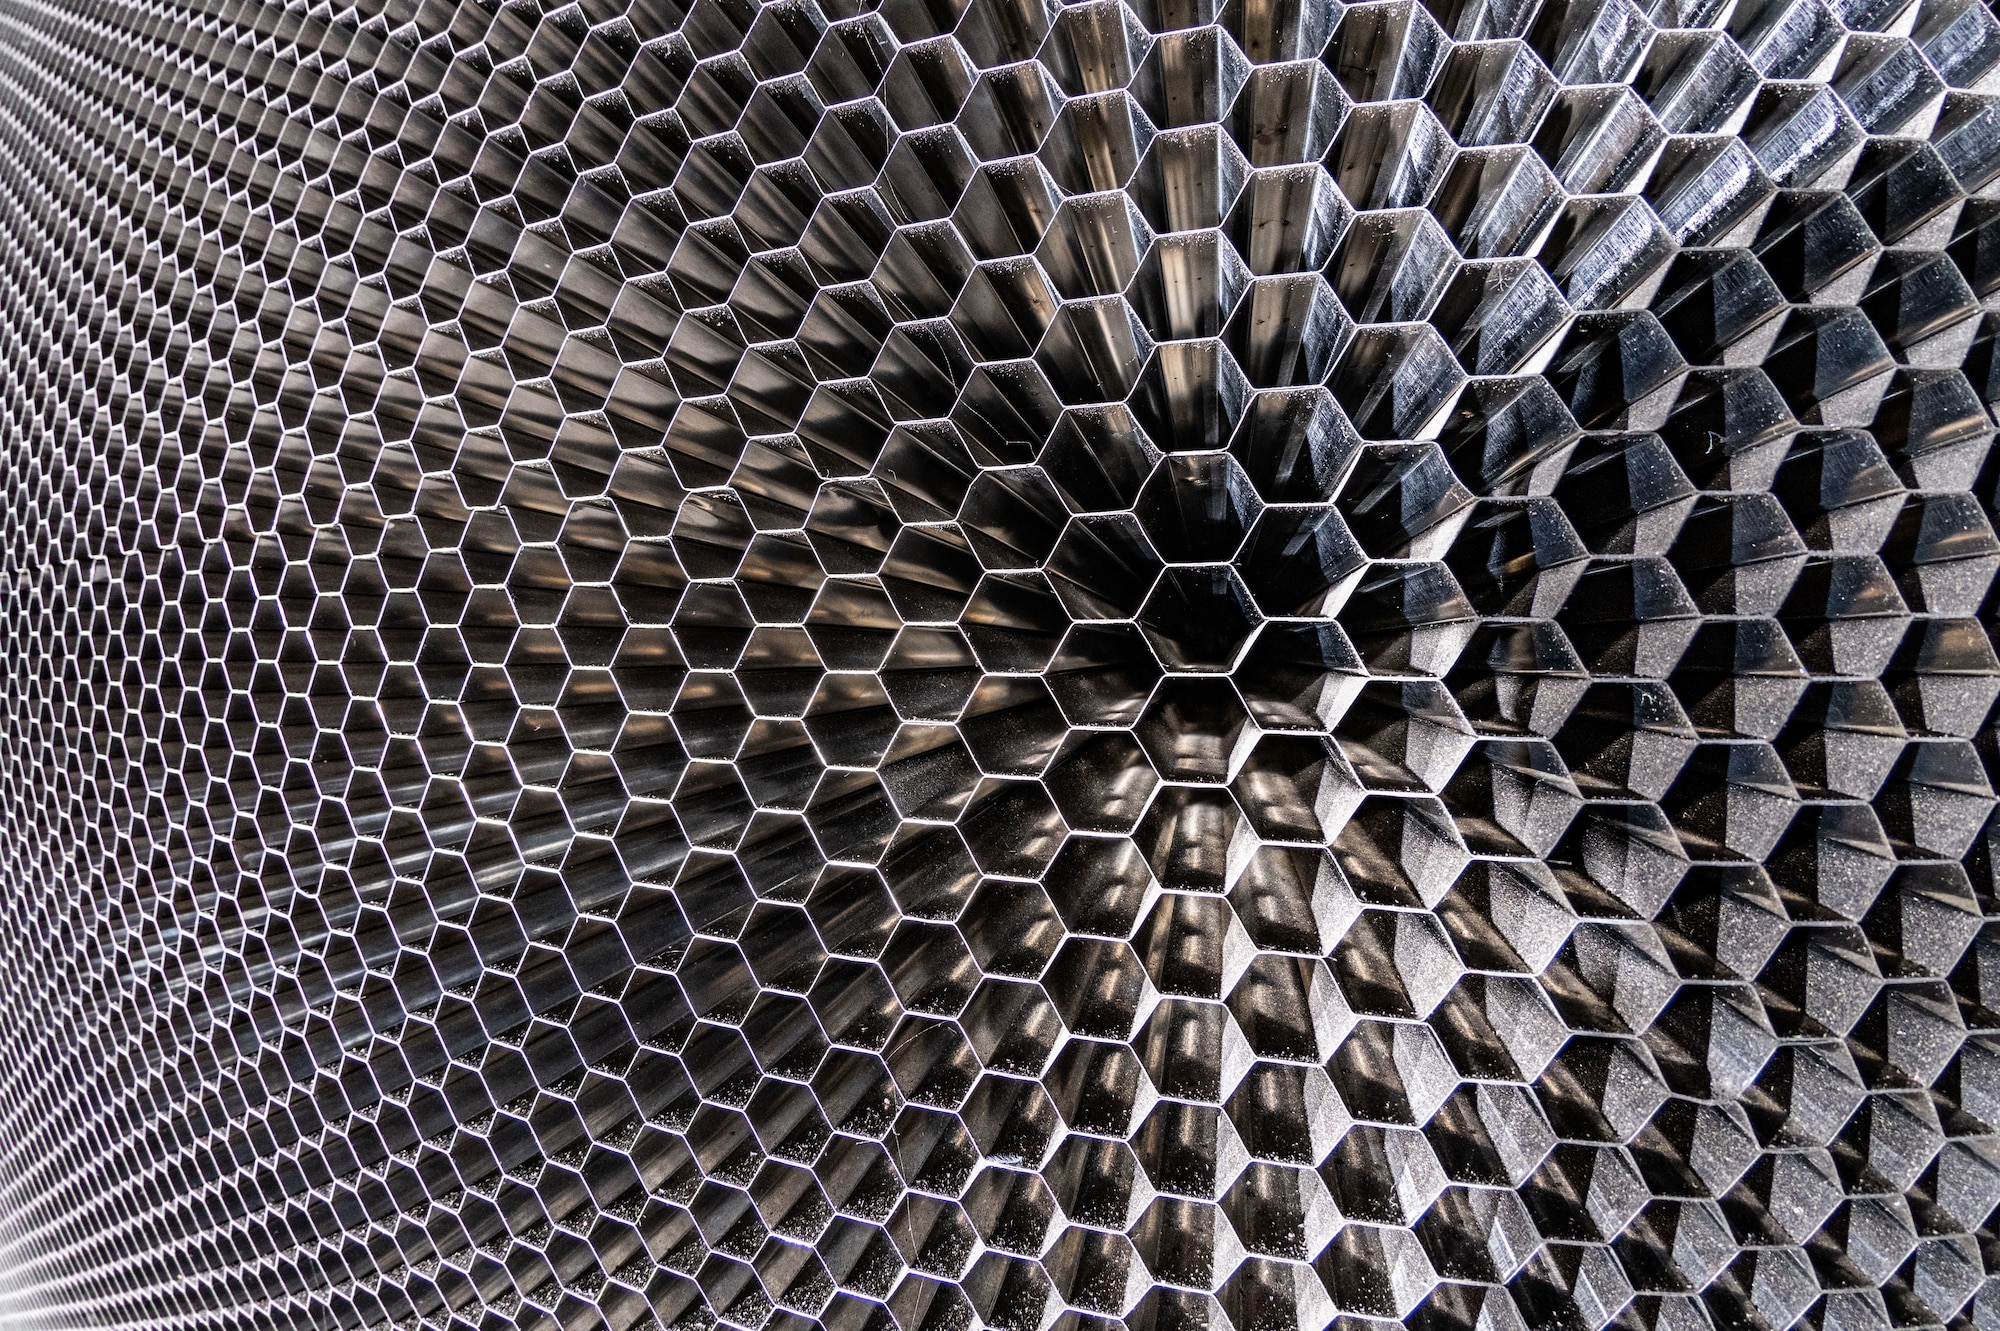 A closeup of the “honeycomb” structure in the 16-foot supersonic wind tunnel at Arnold Air Force Base, Tenn., is shown. The purpose of the honeycomb is to enhance wind tunnel flow quality. The installation process was completed in October 2023. The honeycomb is a single-piece structure that measures 55 feet in diameter, 4 feet thick and weighs more than 67 tons. It is made up of thousands of stainless steel 1-inch hexagonal honeycomb tubes. (U.S. Air Force photo by Keith Thornburgh)